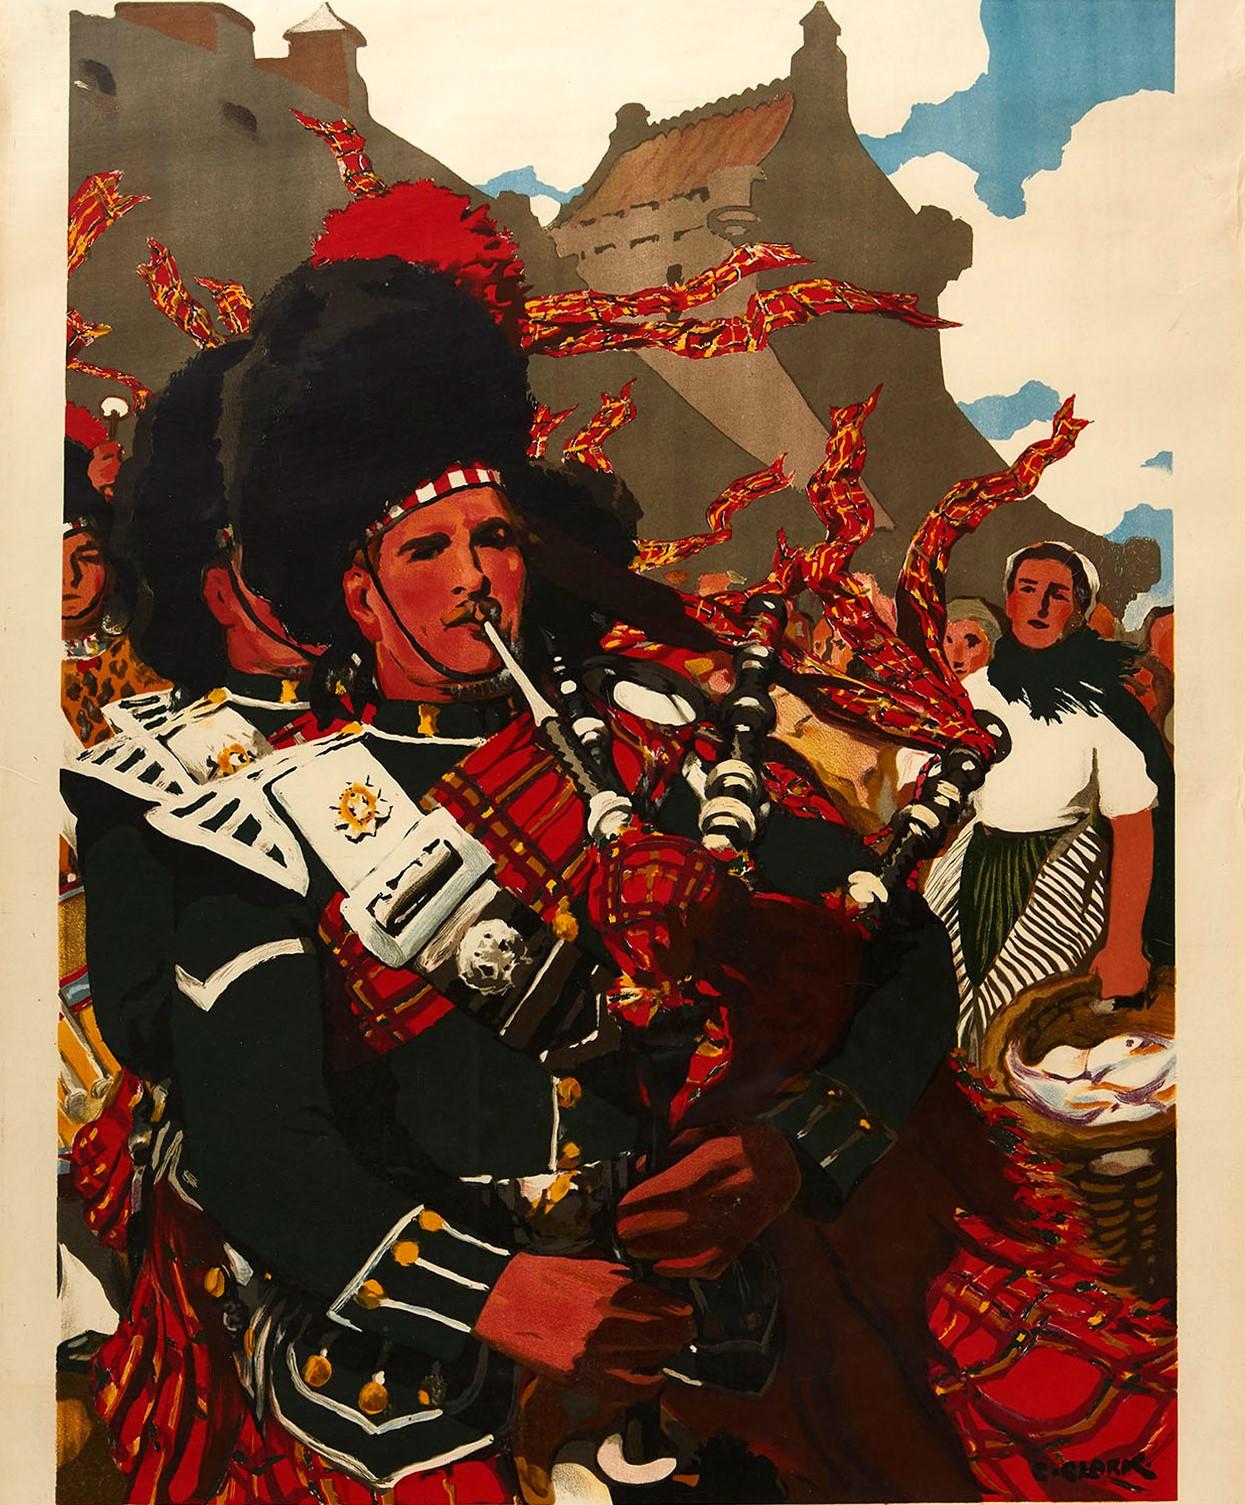 Original vintage French travel poster for Scotland / Ecosse issued by the London, Midland and Scottish Railway LMS and London North Eastern Railway LNER - featuring great artwork by Christopher Clark (1875-1942) depicting pipers in military tartan